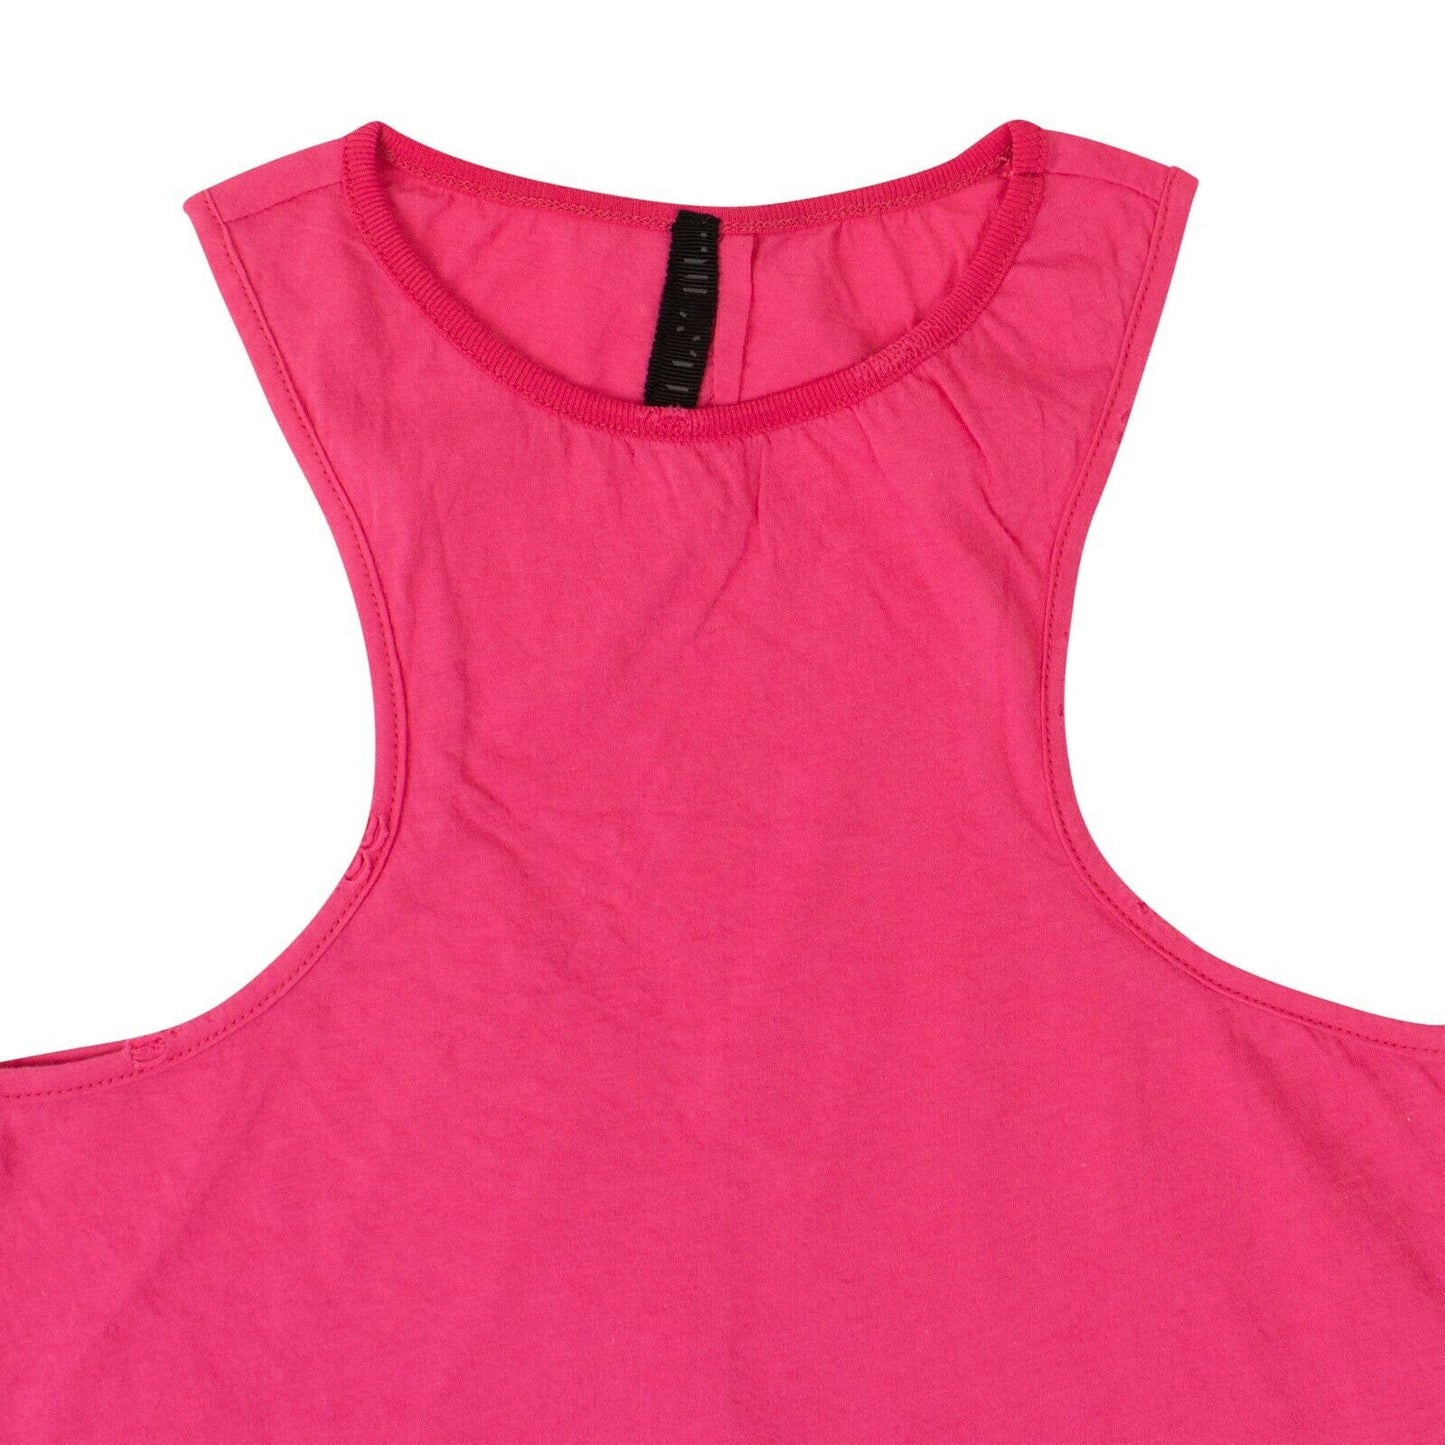 Unravel Project Tank Top - Pink